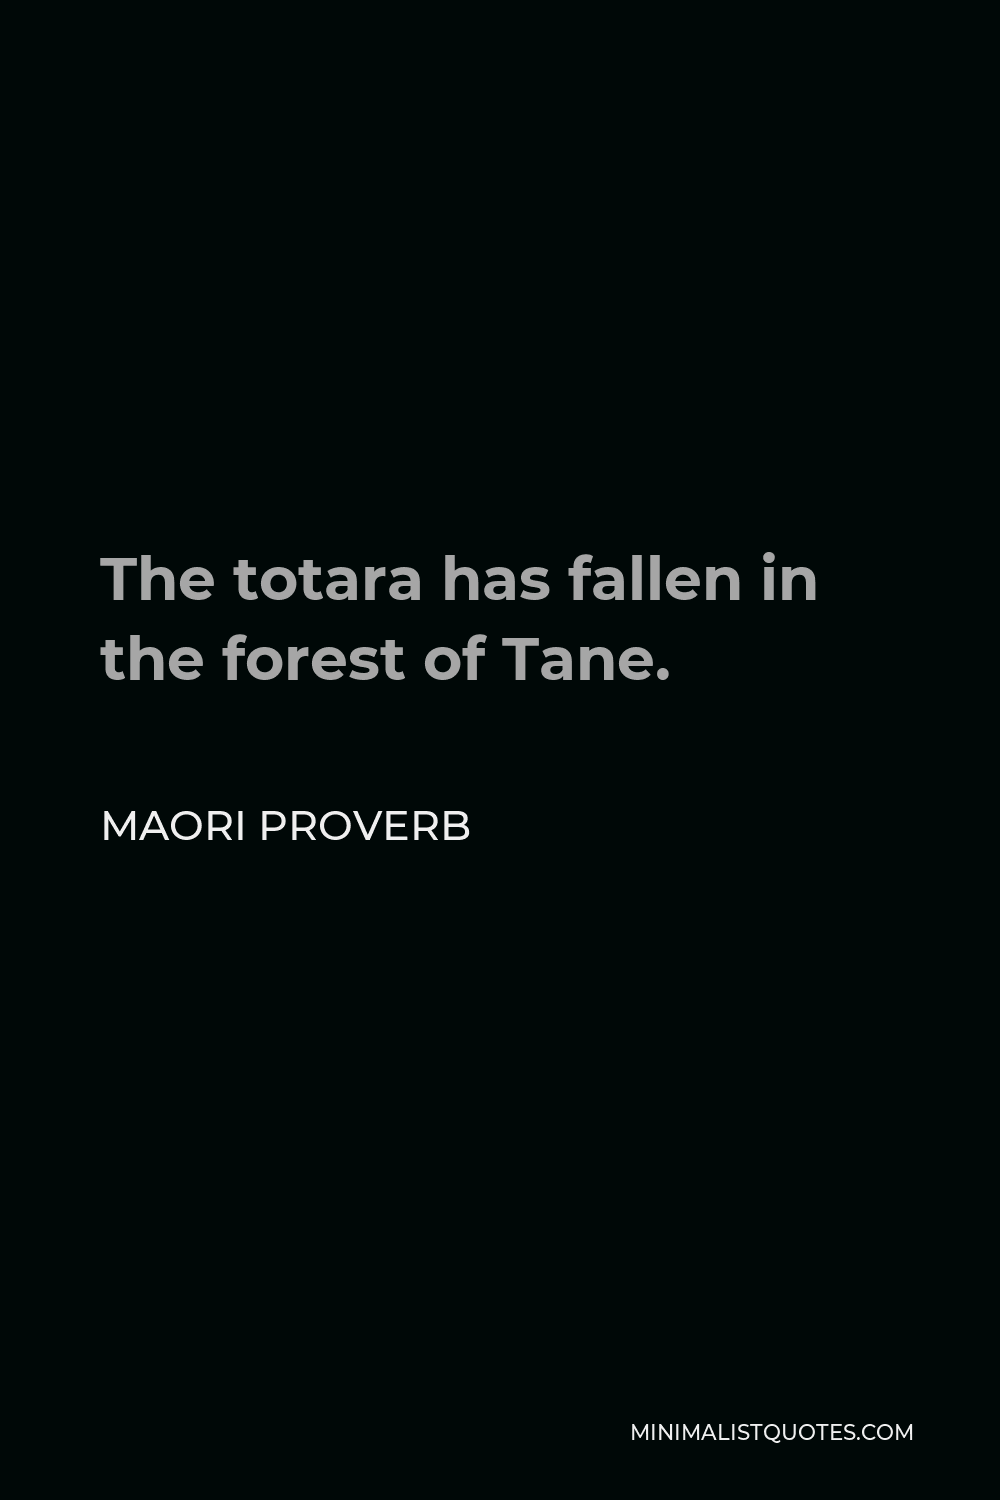 Maori Proverb Quote - The totara has fallen in the forest of Tane.